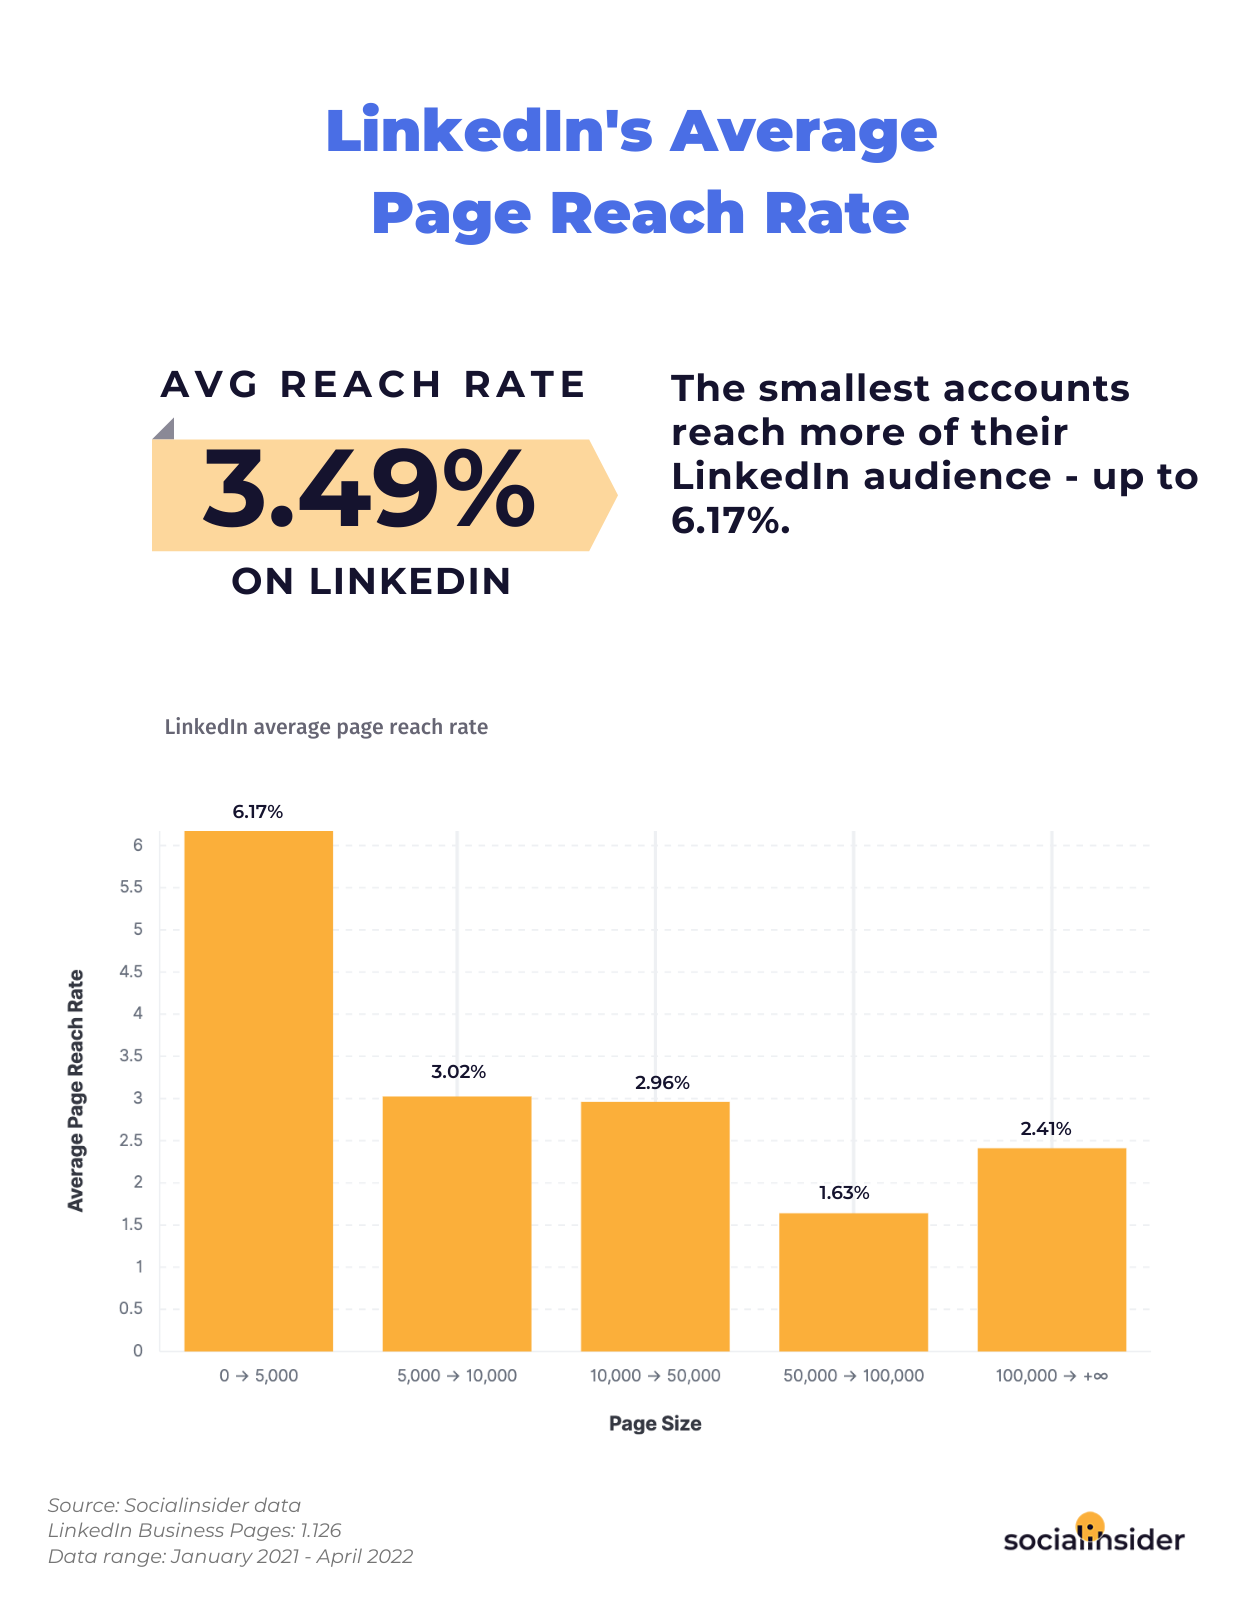 Here you can see what's the average page reach rate on LinkedIn in 2022.